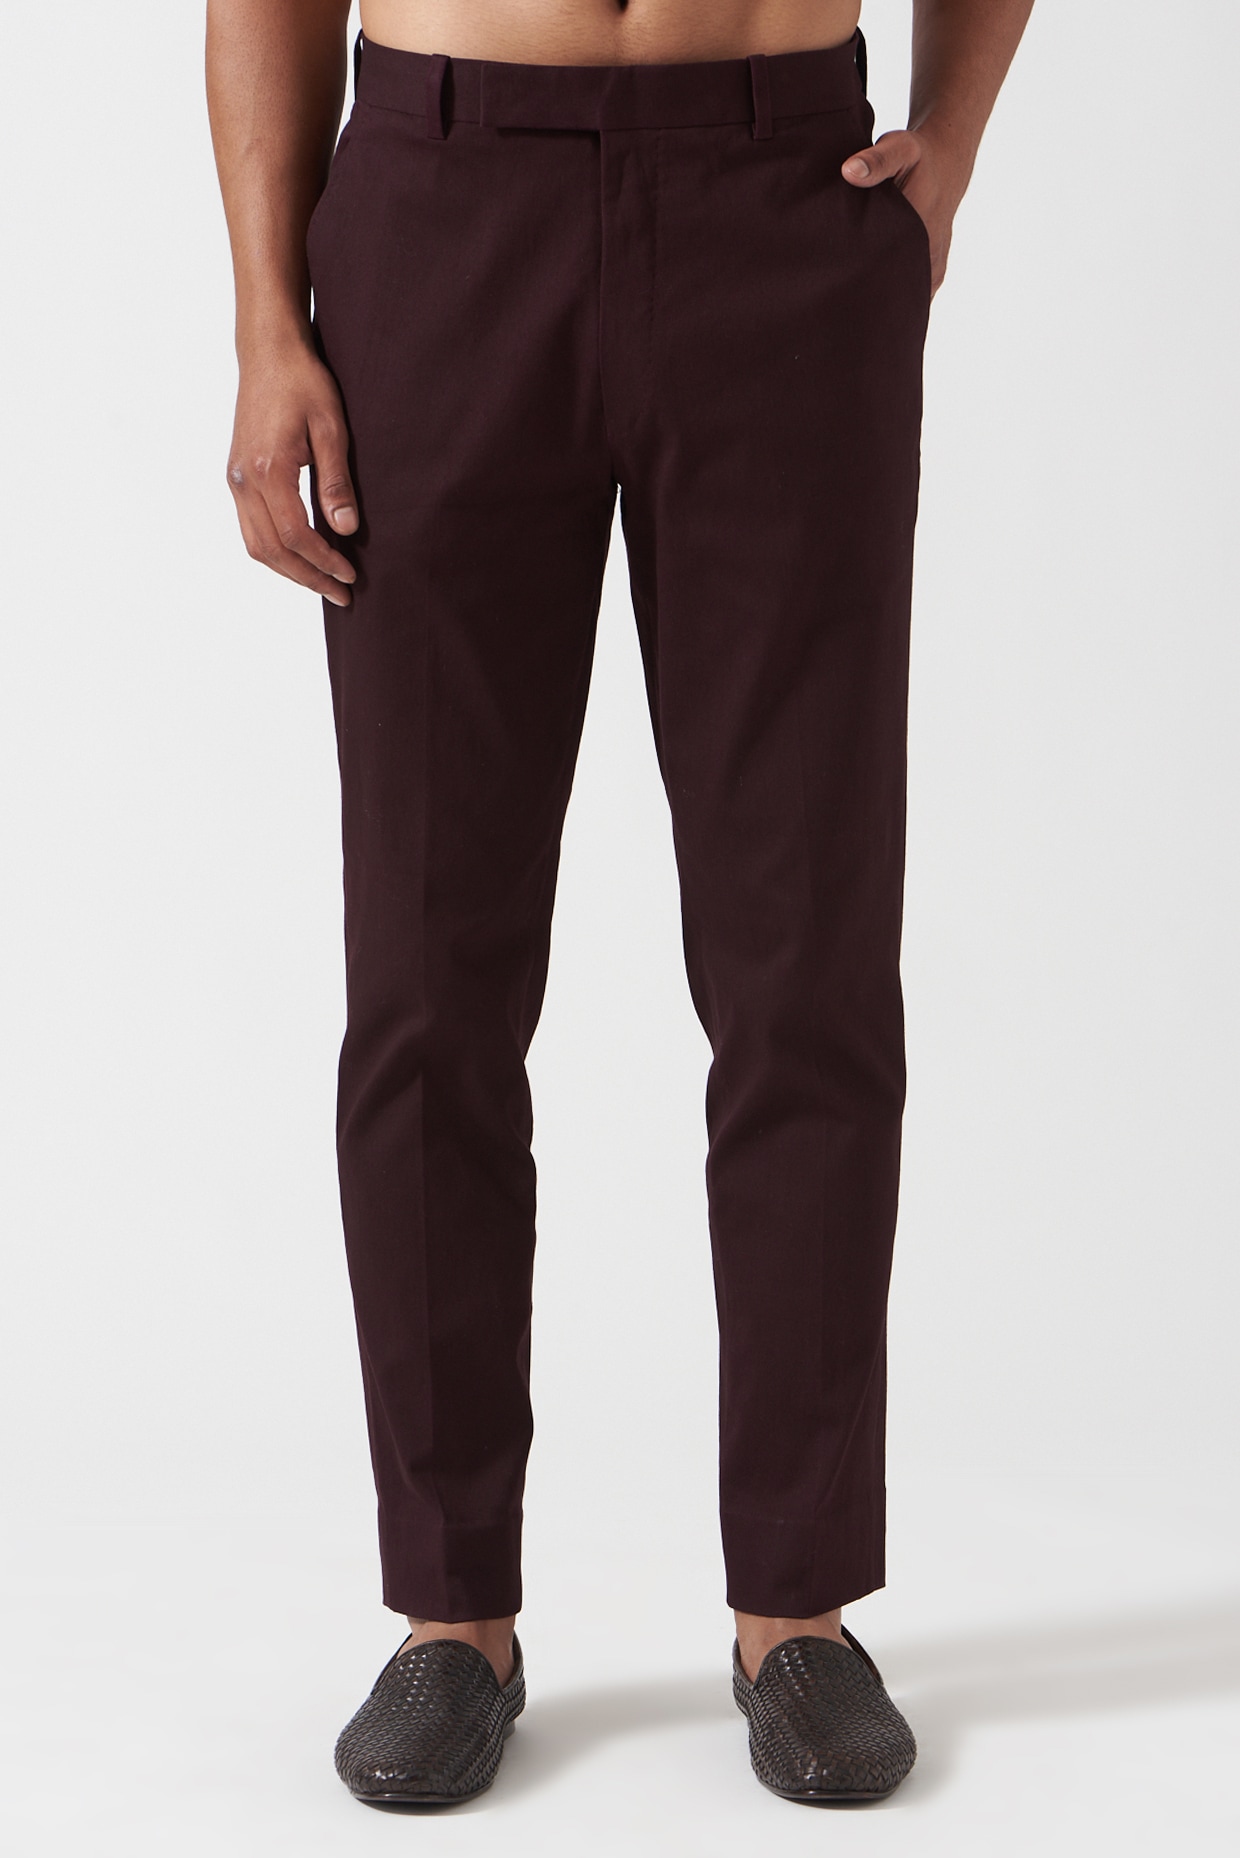 Mens Stretch Trousers in cotton on sale  FASHIOLAin